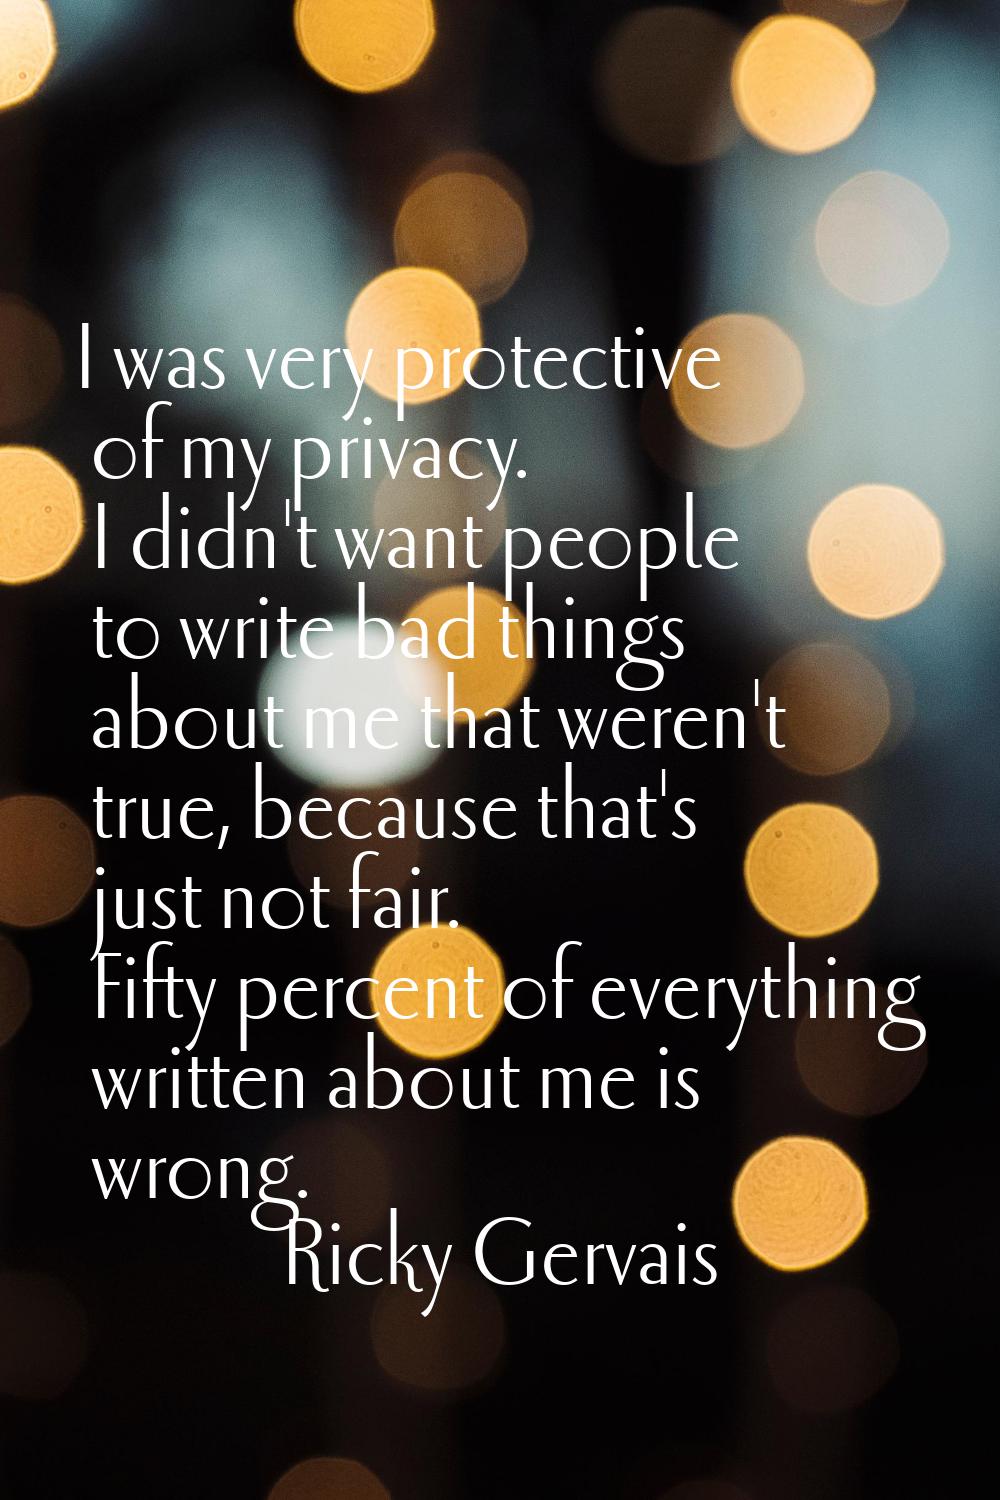 I was very protective of my privacy. I didn't want people to write bad things about me that weren't